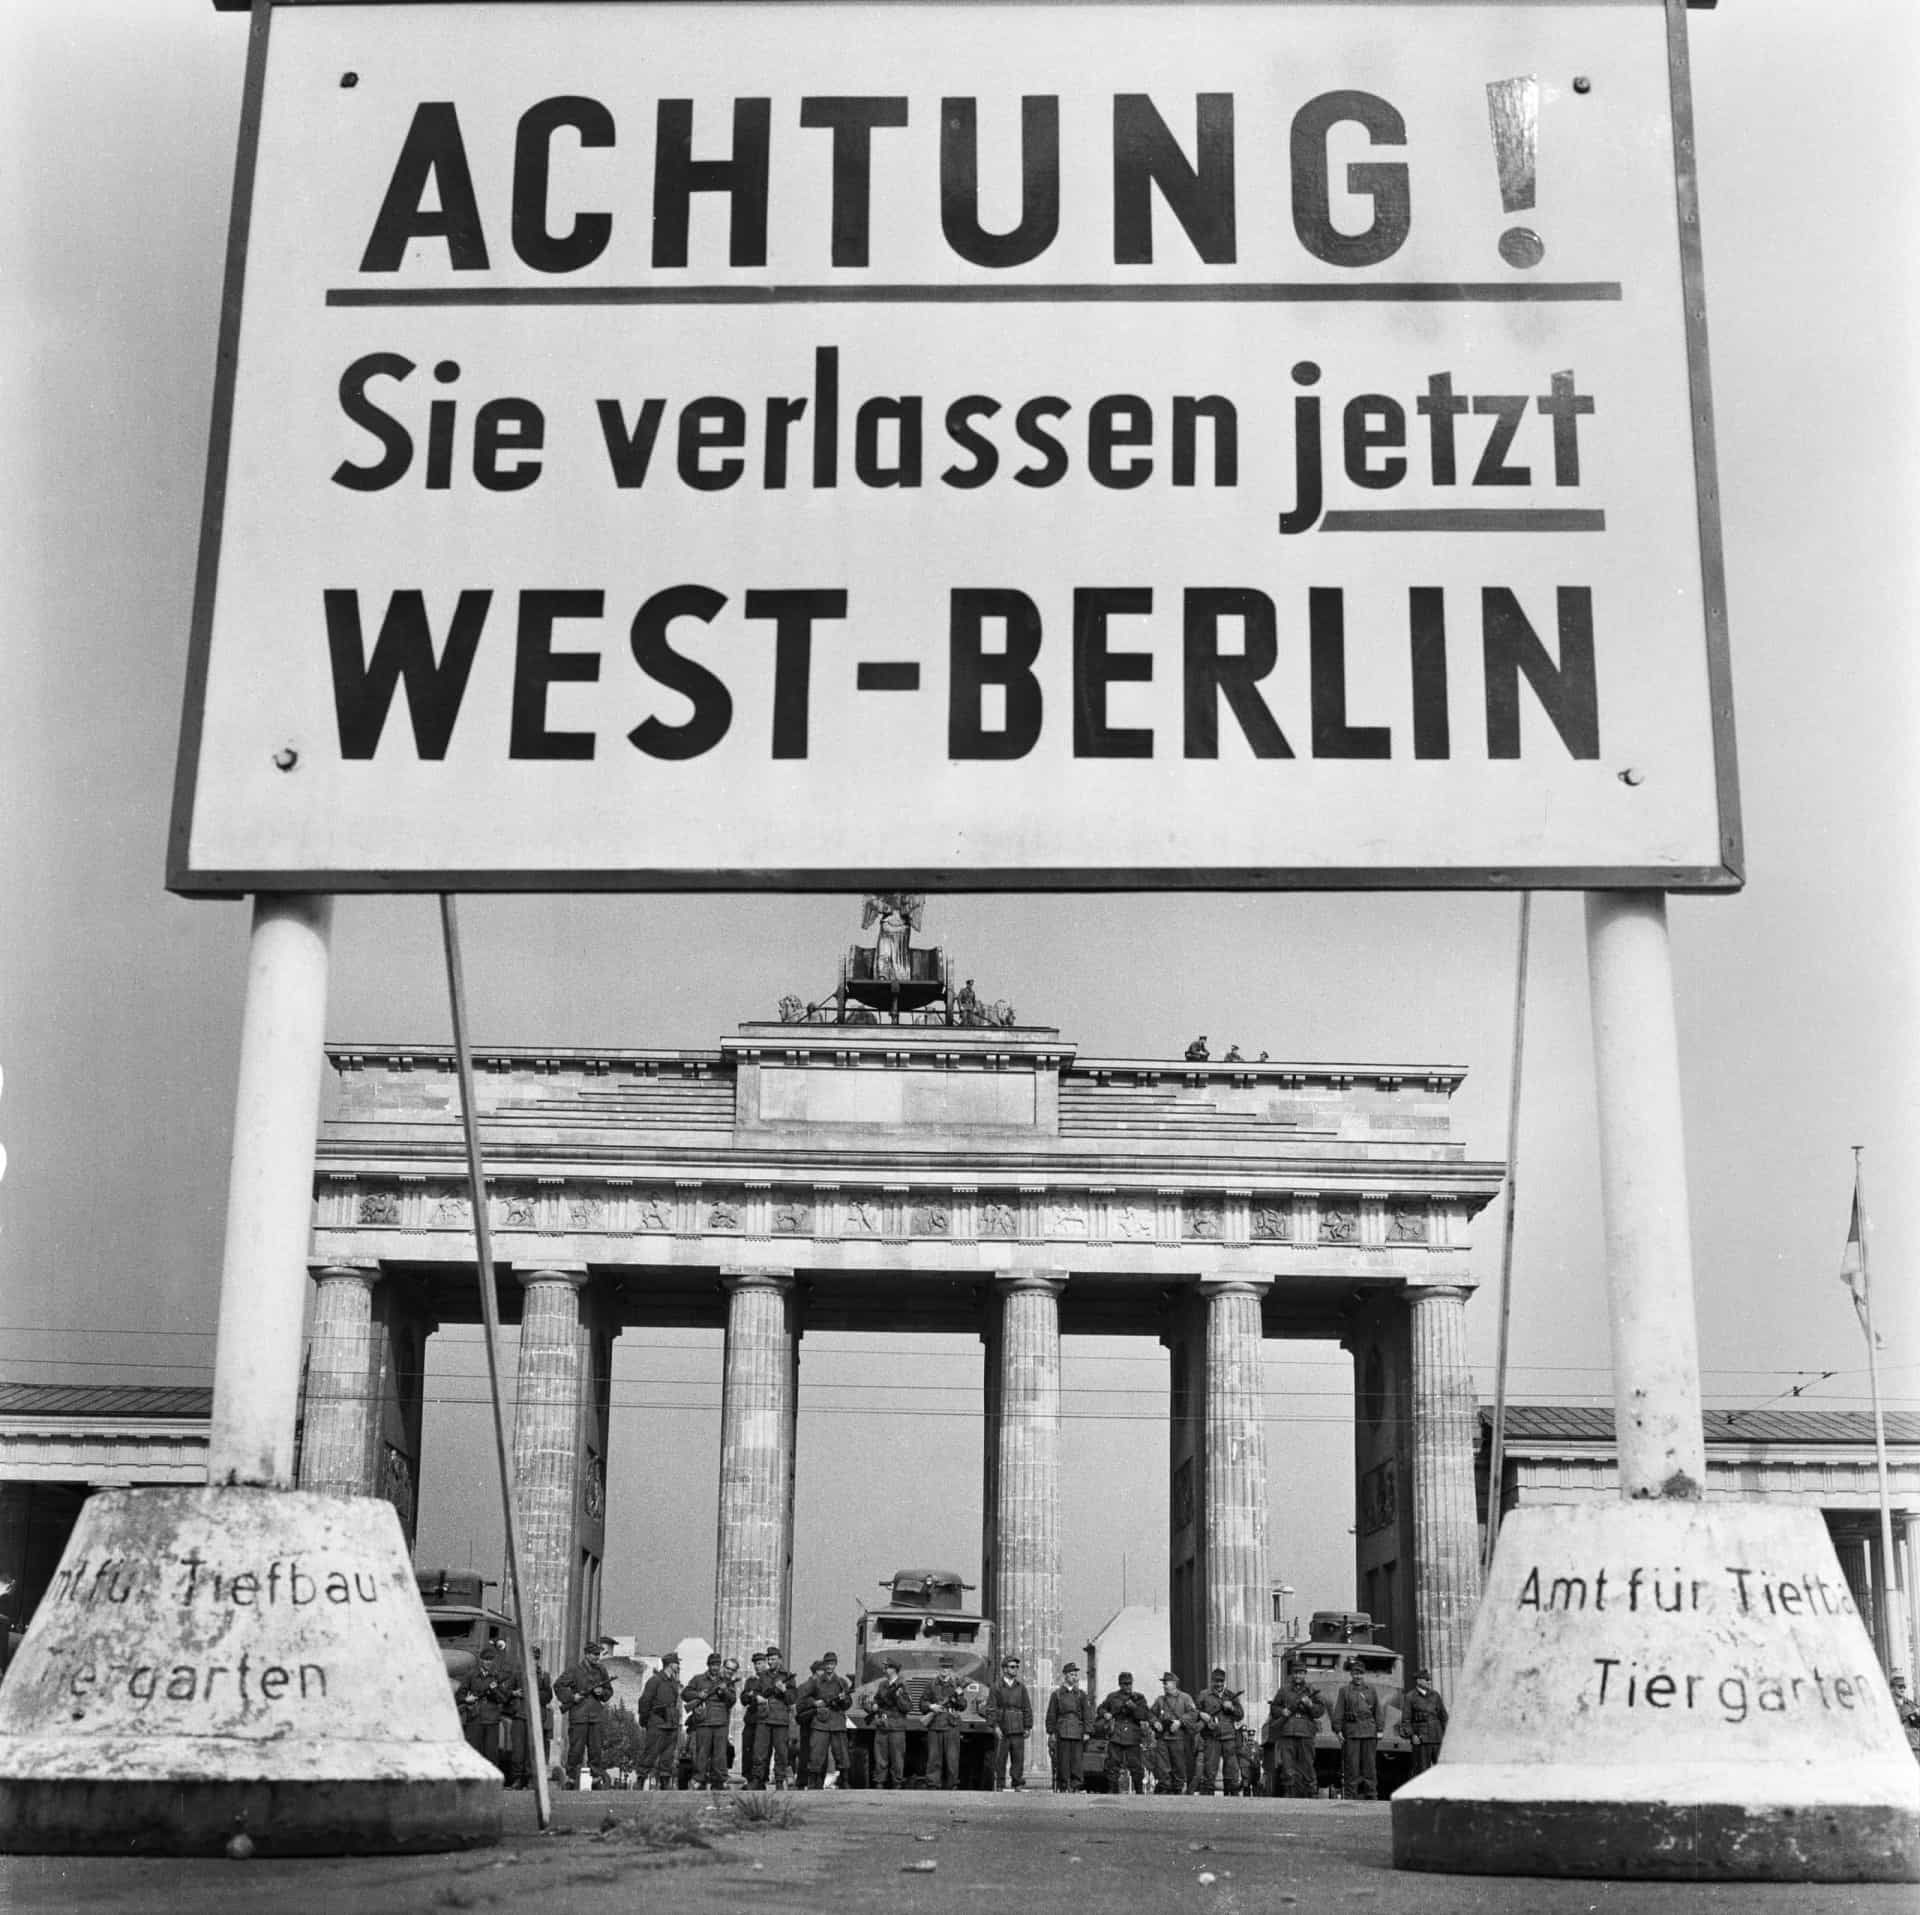 <p>"Attention! You are now leaving West Berlin," reads the sign. After the <a href="https://www.starsinsider.com/lifestyle/357272/fascinating-photos-of-world-war-ii" rel="noopener">Second World War</a>, Berlin was divided into four sectors: France controlled the north-western, England the western, and the US the south-western parts of the city, while the whole of the eastern part of Berlin was allocated to the Soviet Union.</p><p><a href="https://www.msn.com/en-us/community/channel/vid-7xx8mnucu55yw63we9va2gwr7uihbxwc68fxqp25x6tg4ftibpra?cvid=94631541bc0f4f89bfd59158d696ad7e">Follow us and access great exclusive content everyday</a></p>